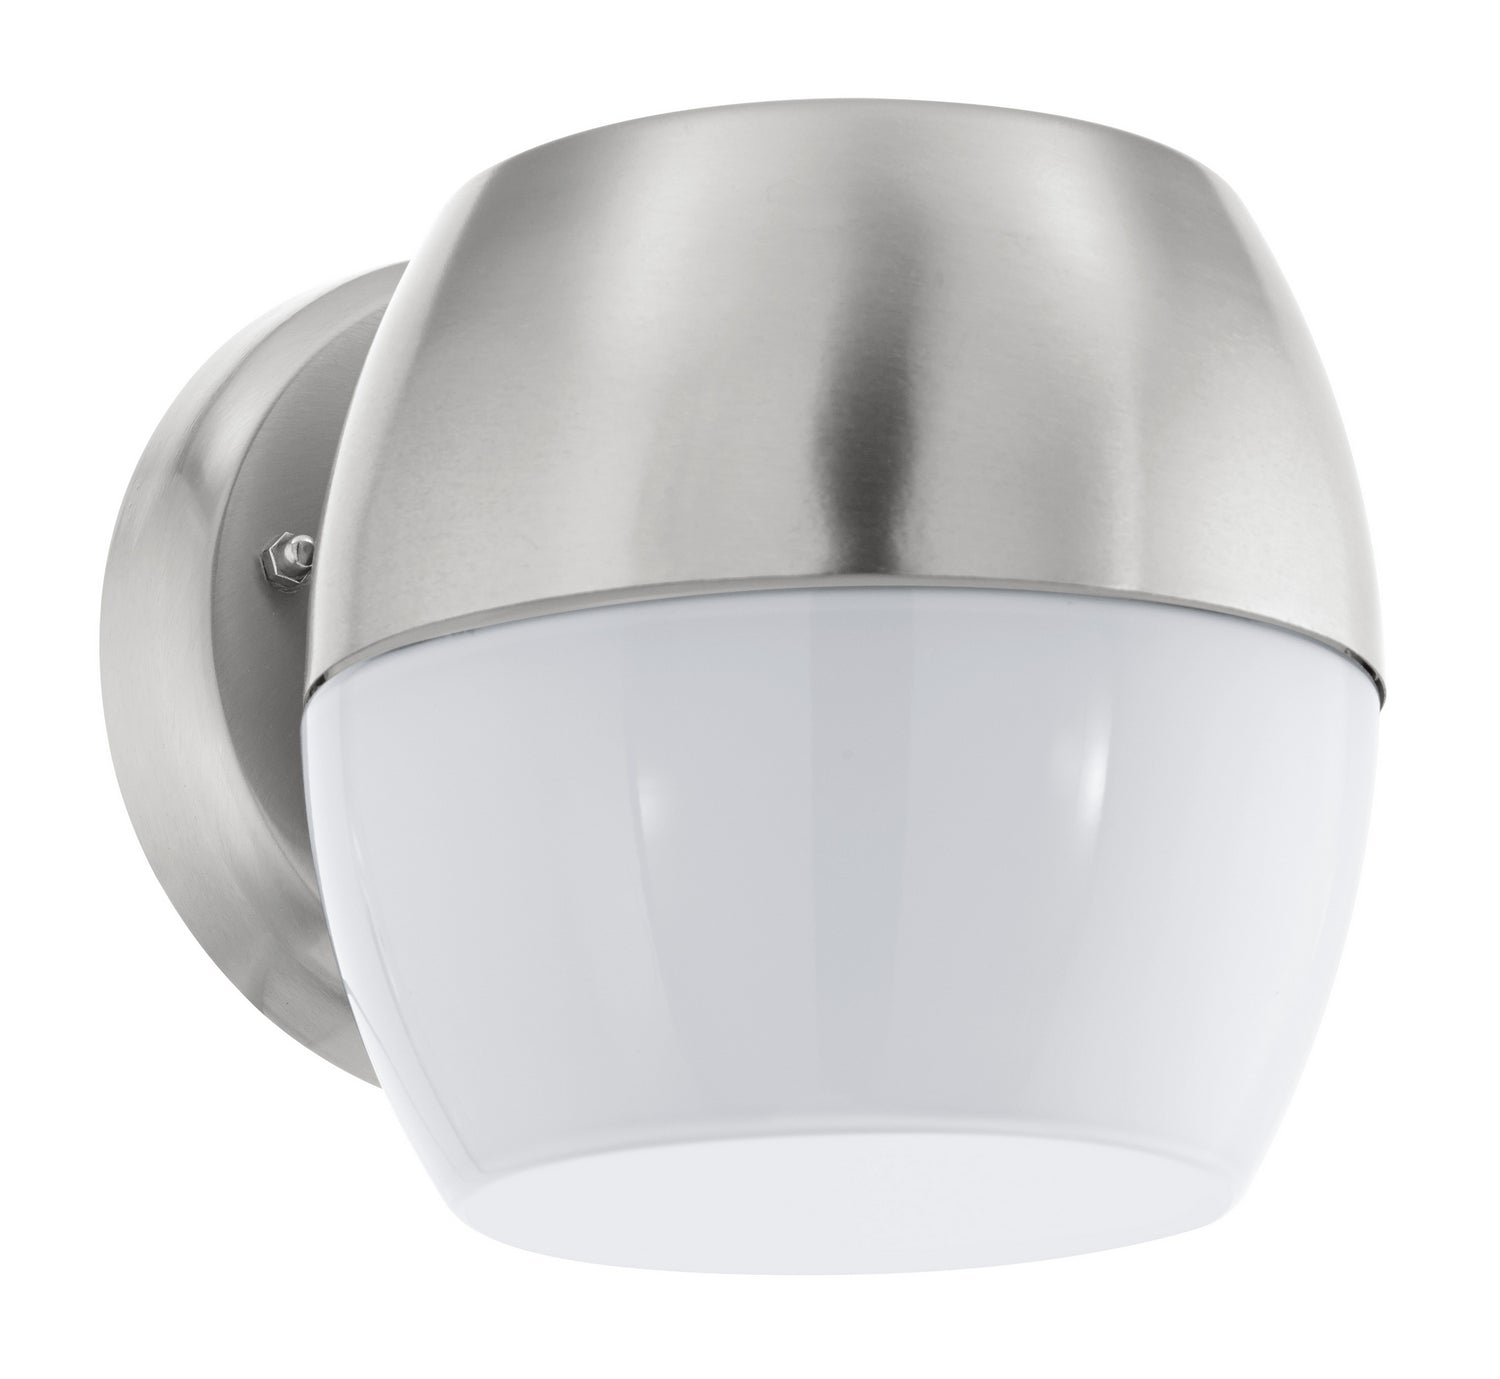 Eglo Canada - LED Outdoor Wall Light - Oncala - Stainless Steel- Union Lighting Luminaires Decor